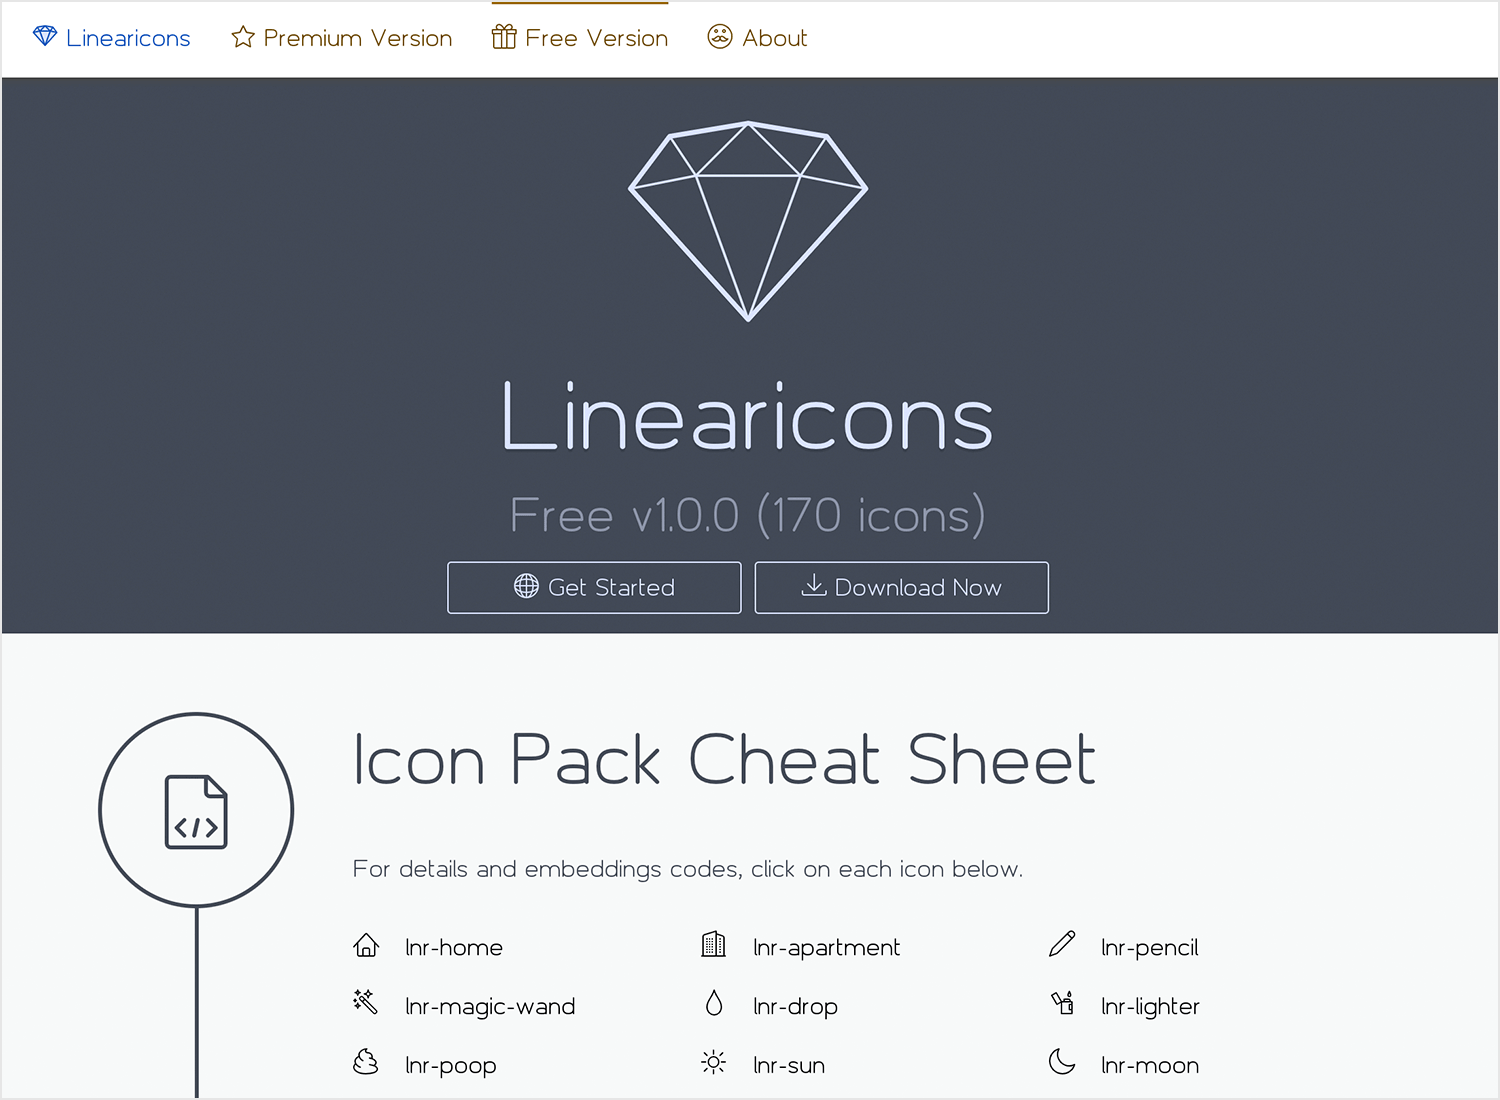 Free website icons to download - Linearicons